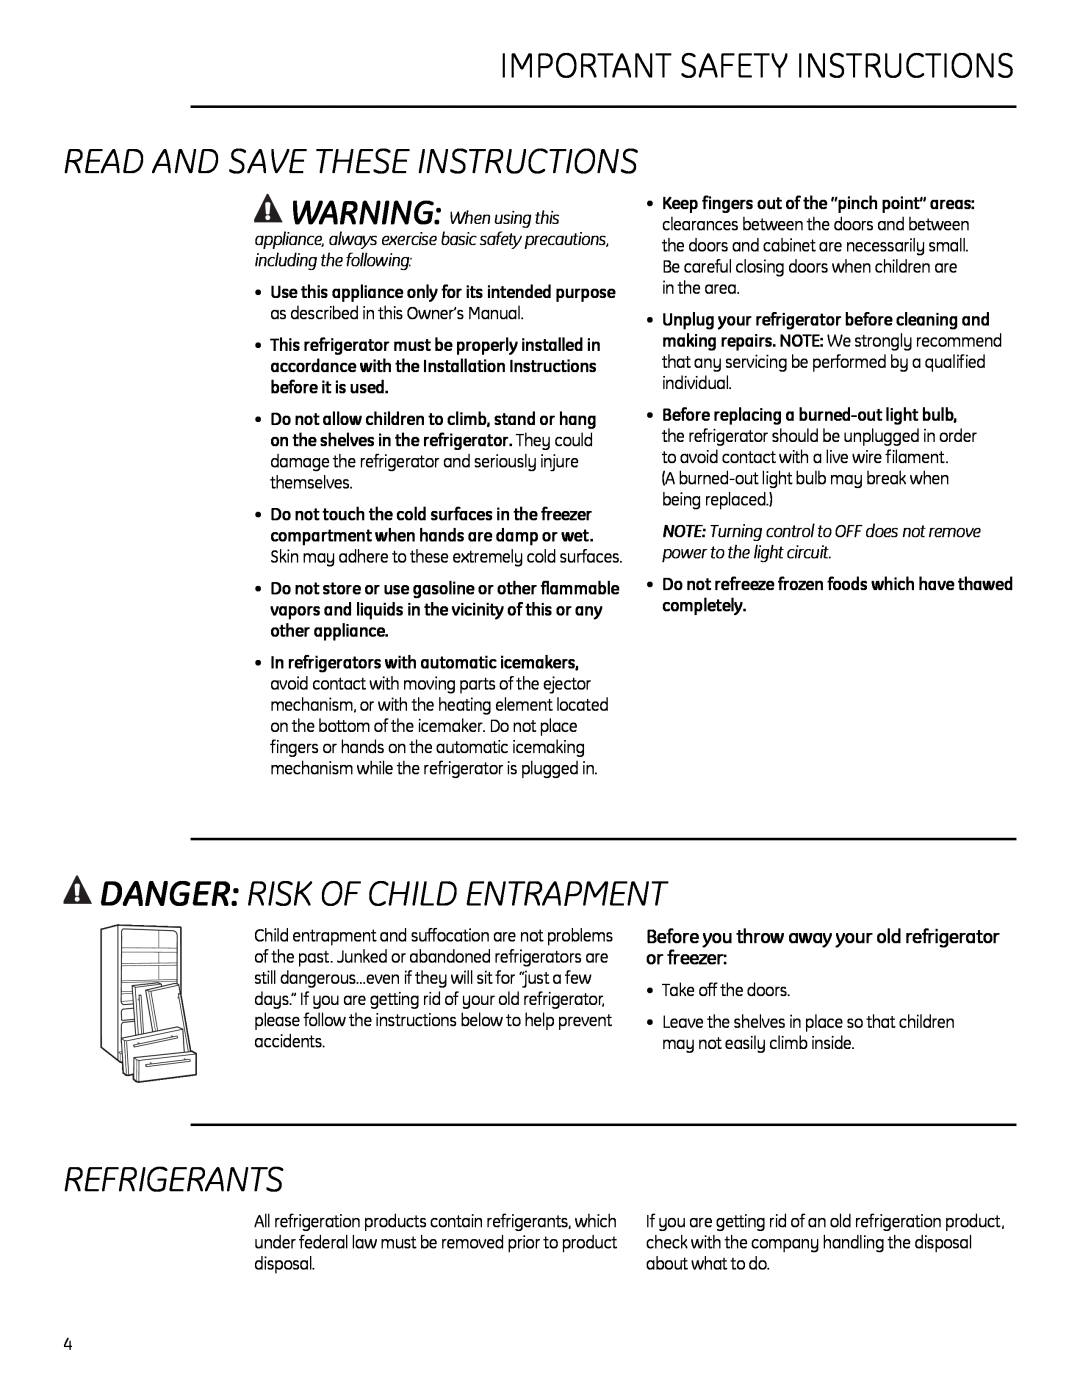 GE Monogram 225D1804P011 Important Safety Instructions, Read And Save These Instructions, Danger Risk Of Child Entrapment 